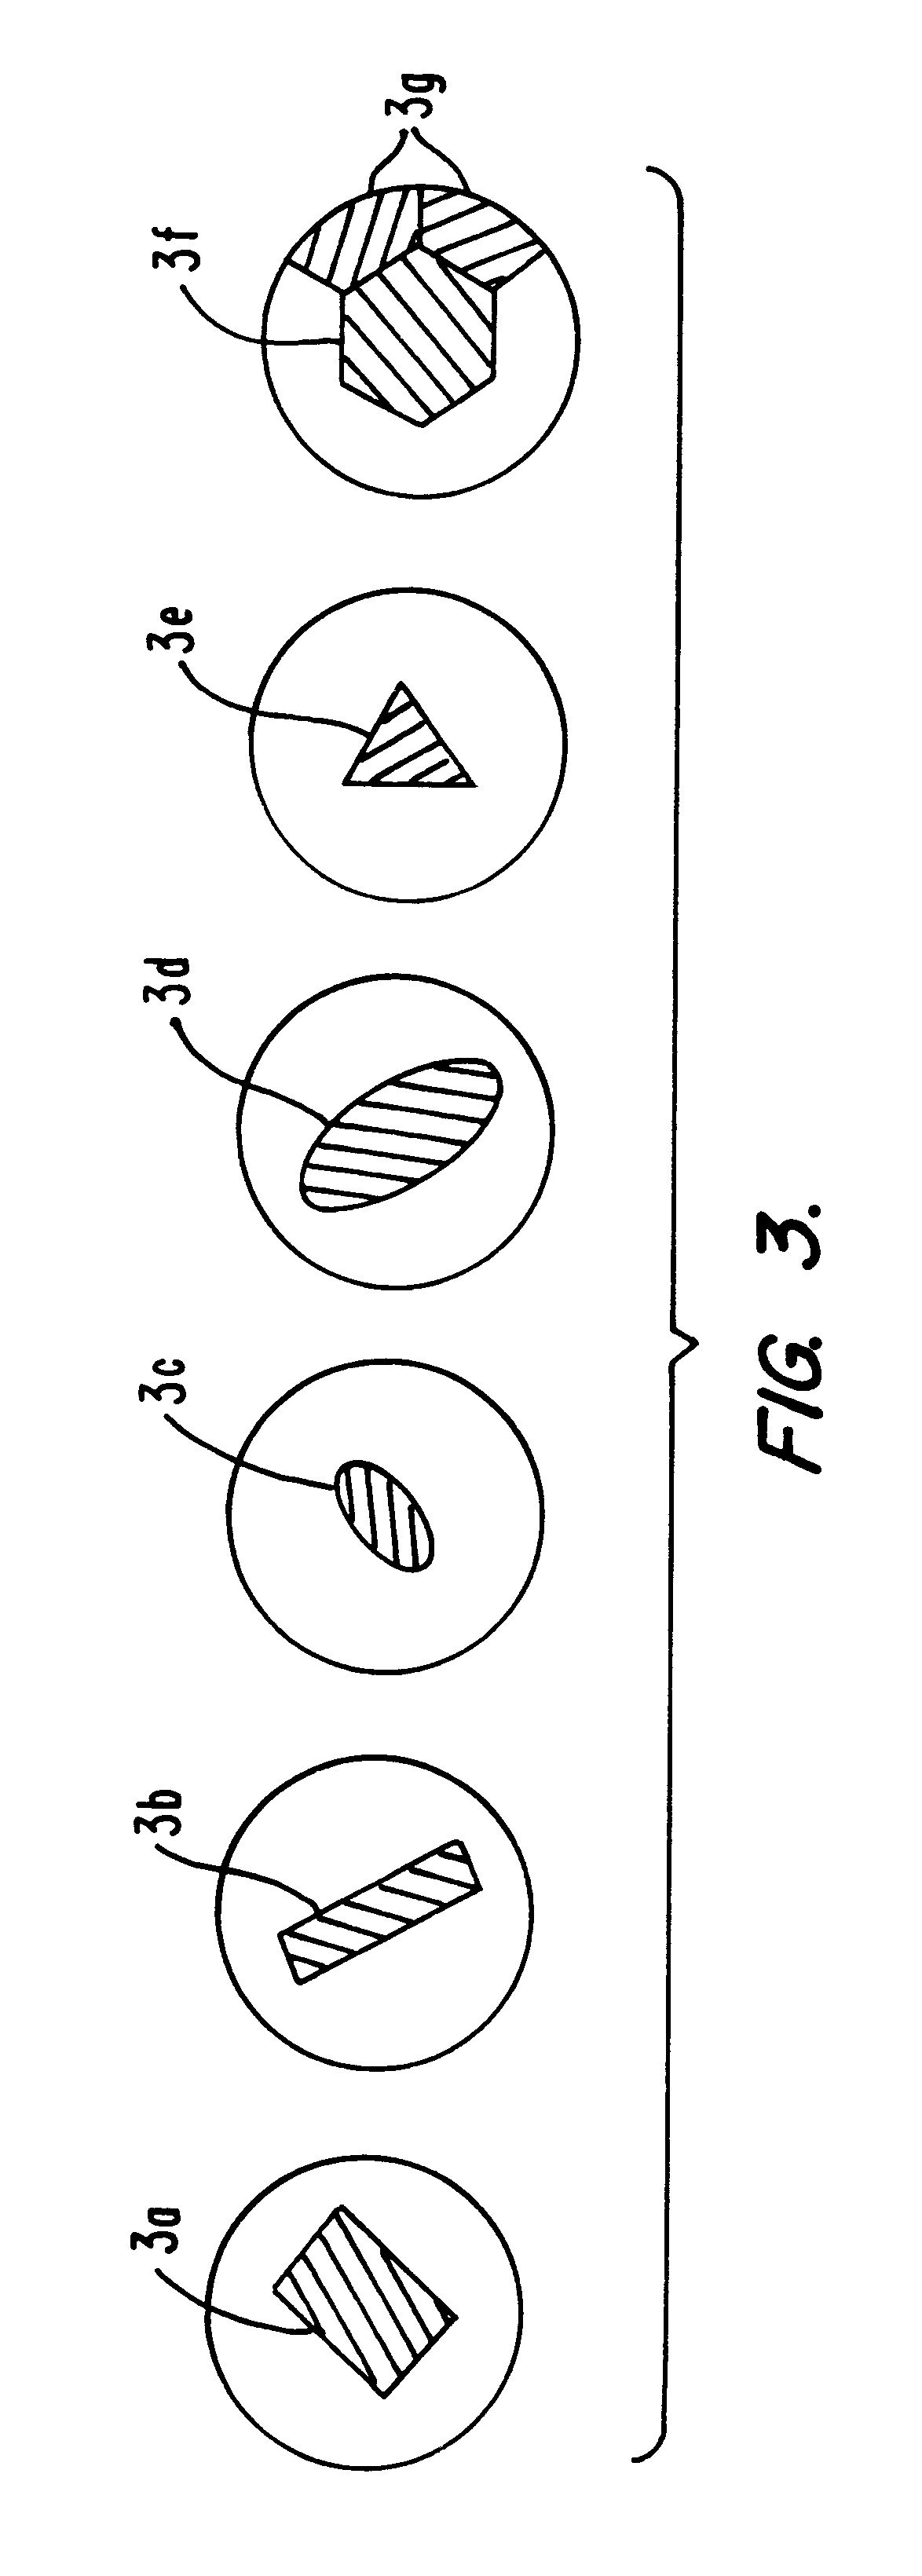 Method for scanning non-overlapping patterns of laser energy with diffractive optics